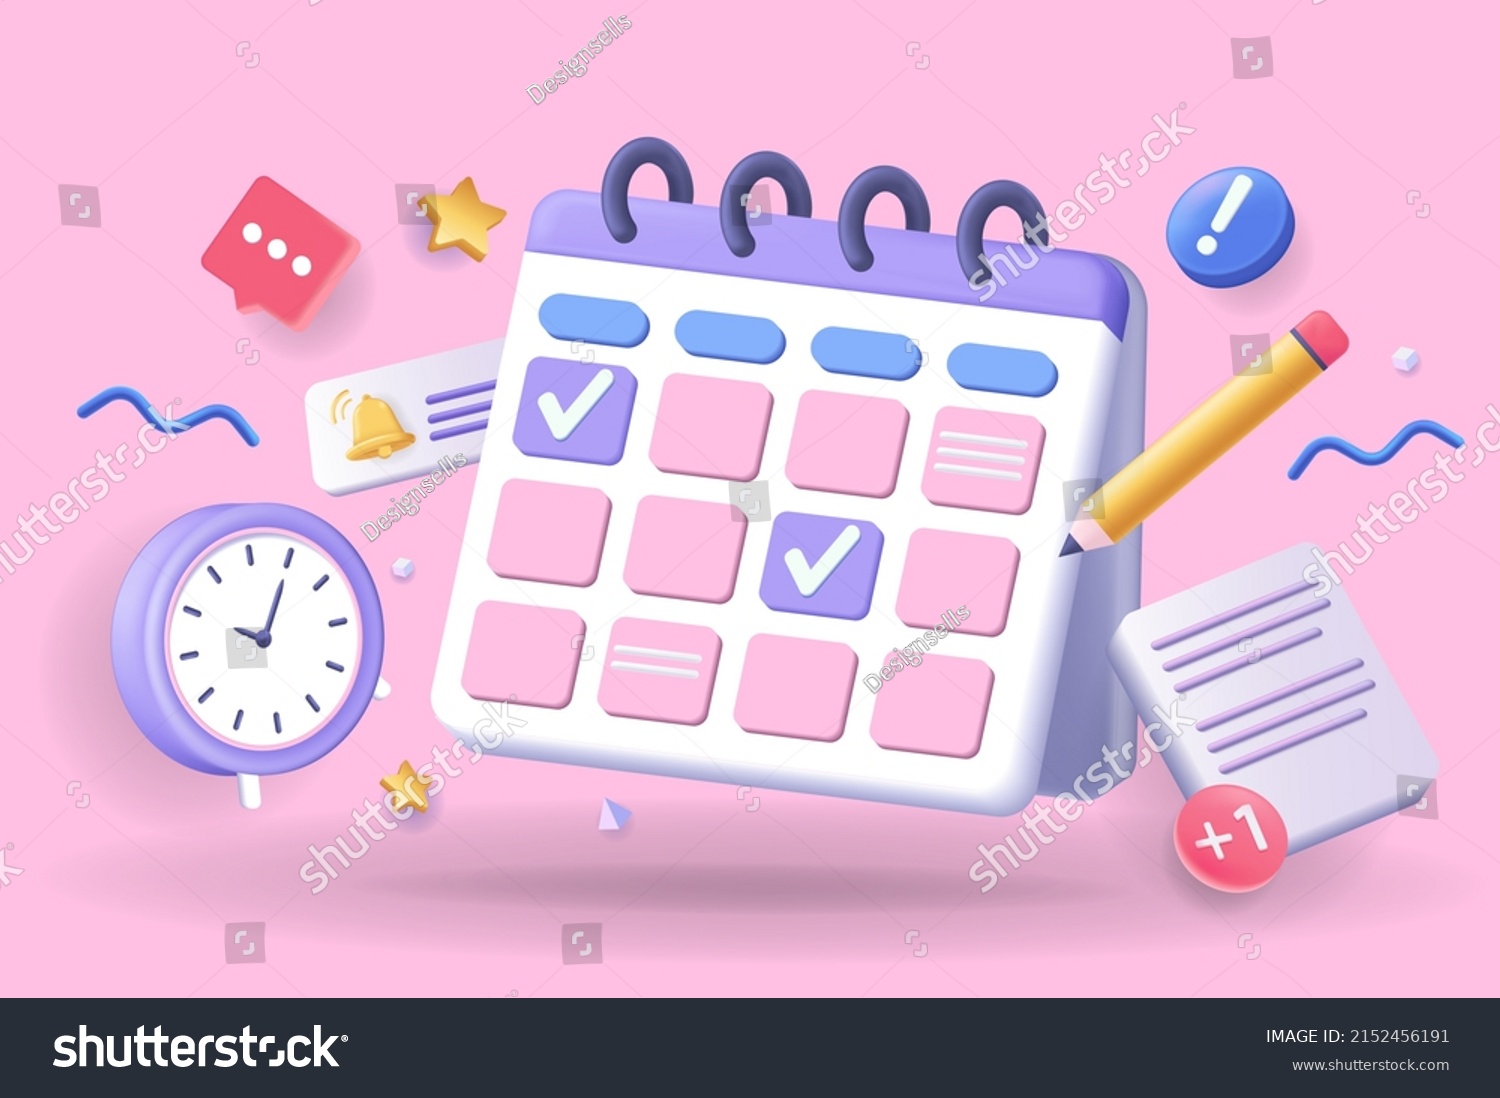 SVG of Calendar concept 3D illustration. Icon composition with calendar with scheduled dates and appointments, clock, to-do list with tasks, reminders and messages. Vector illustration for modern web design svg